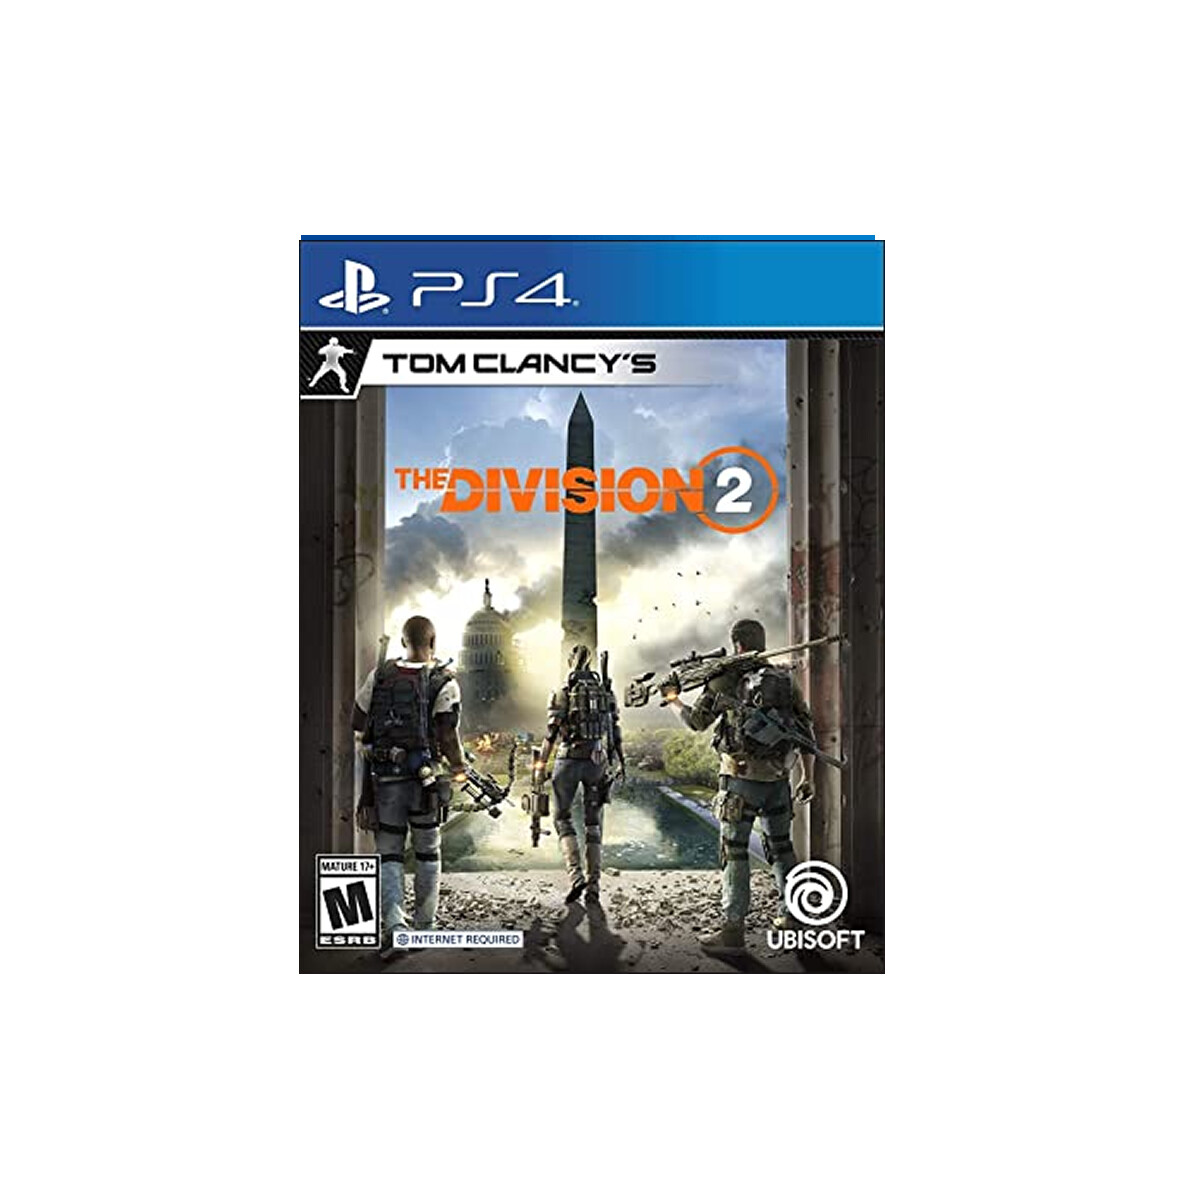 PS4 DIVISION 2 